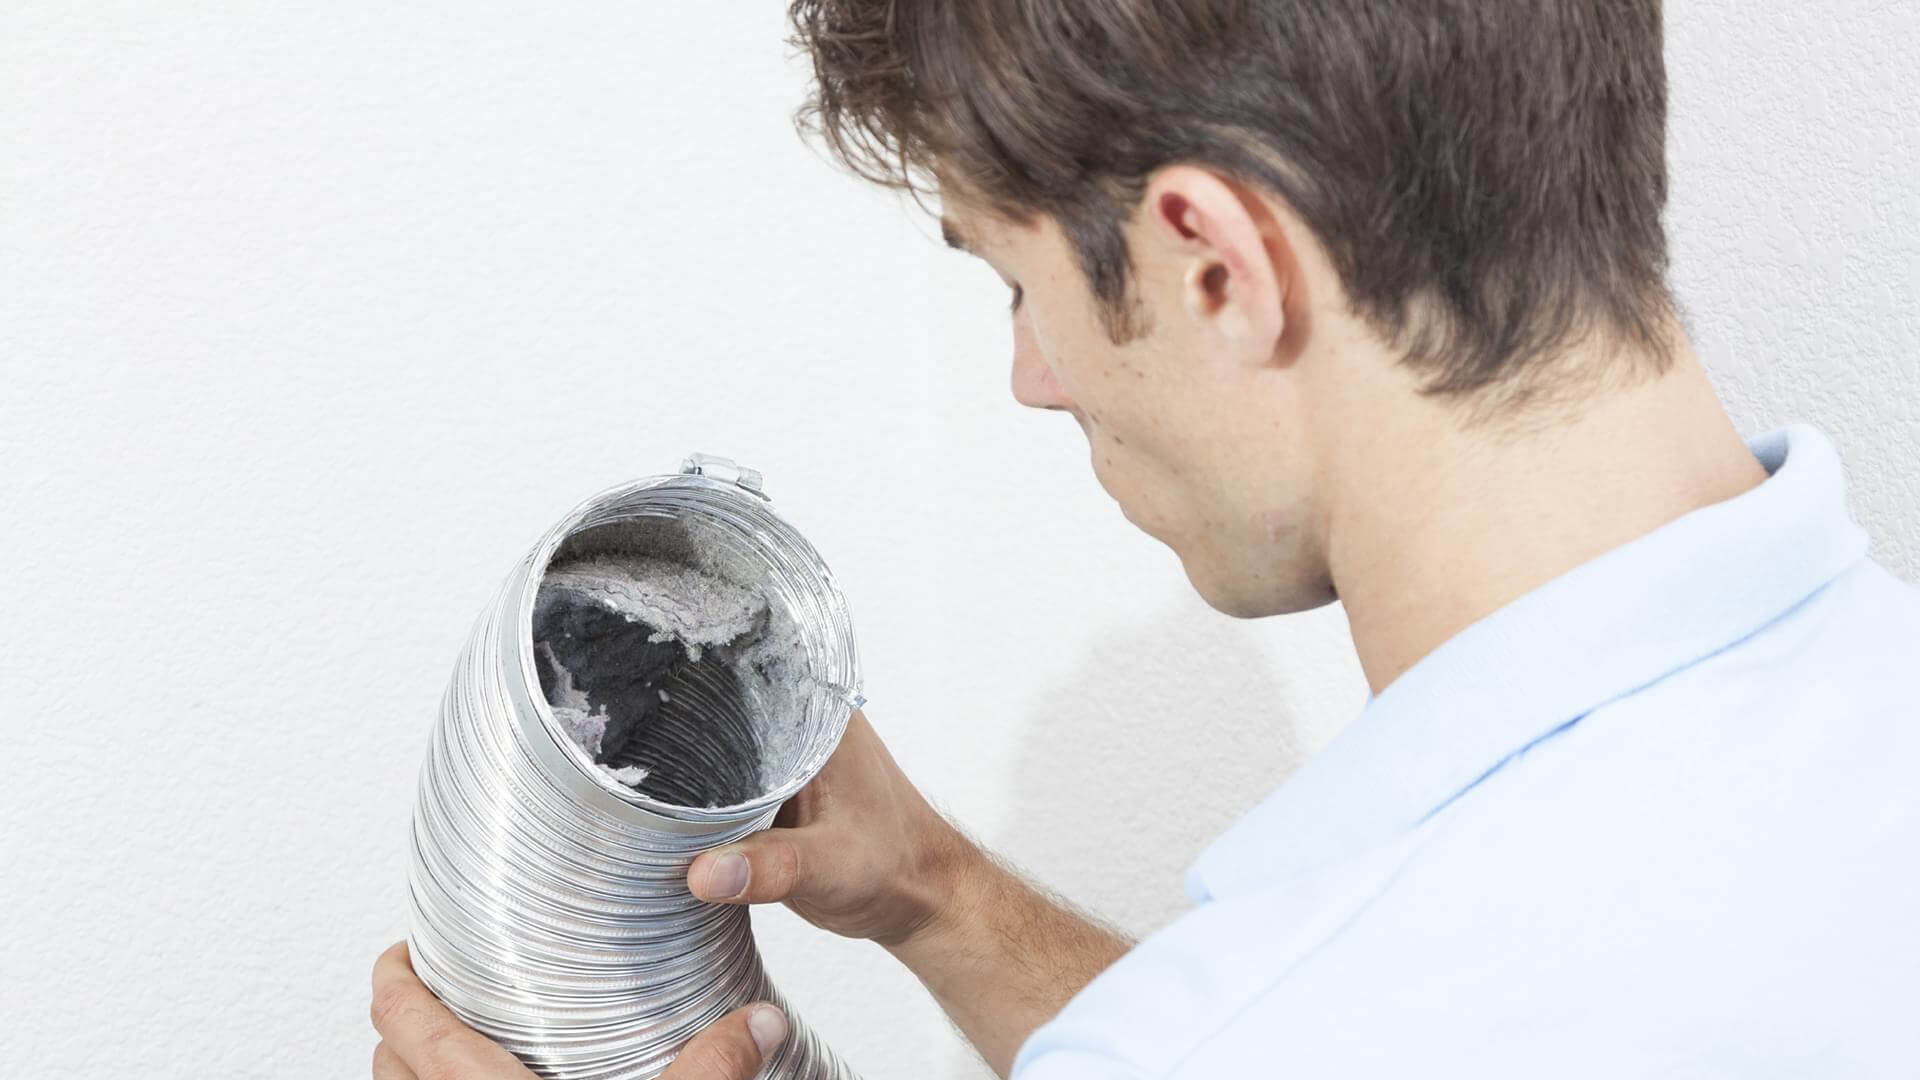 Dryer Vent Cleaning Companies | Six Sense Dryer Vent Cleaning